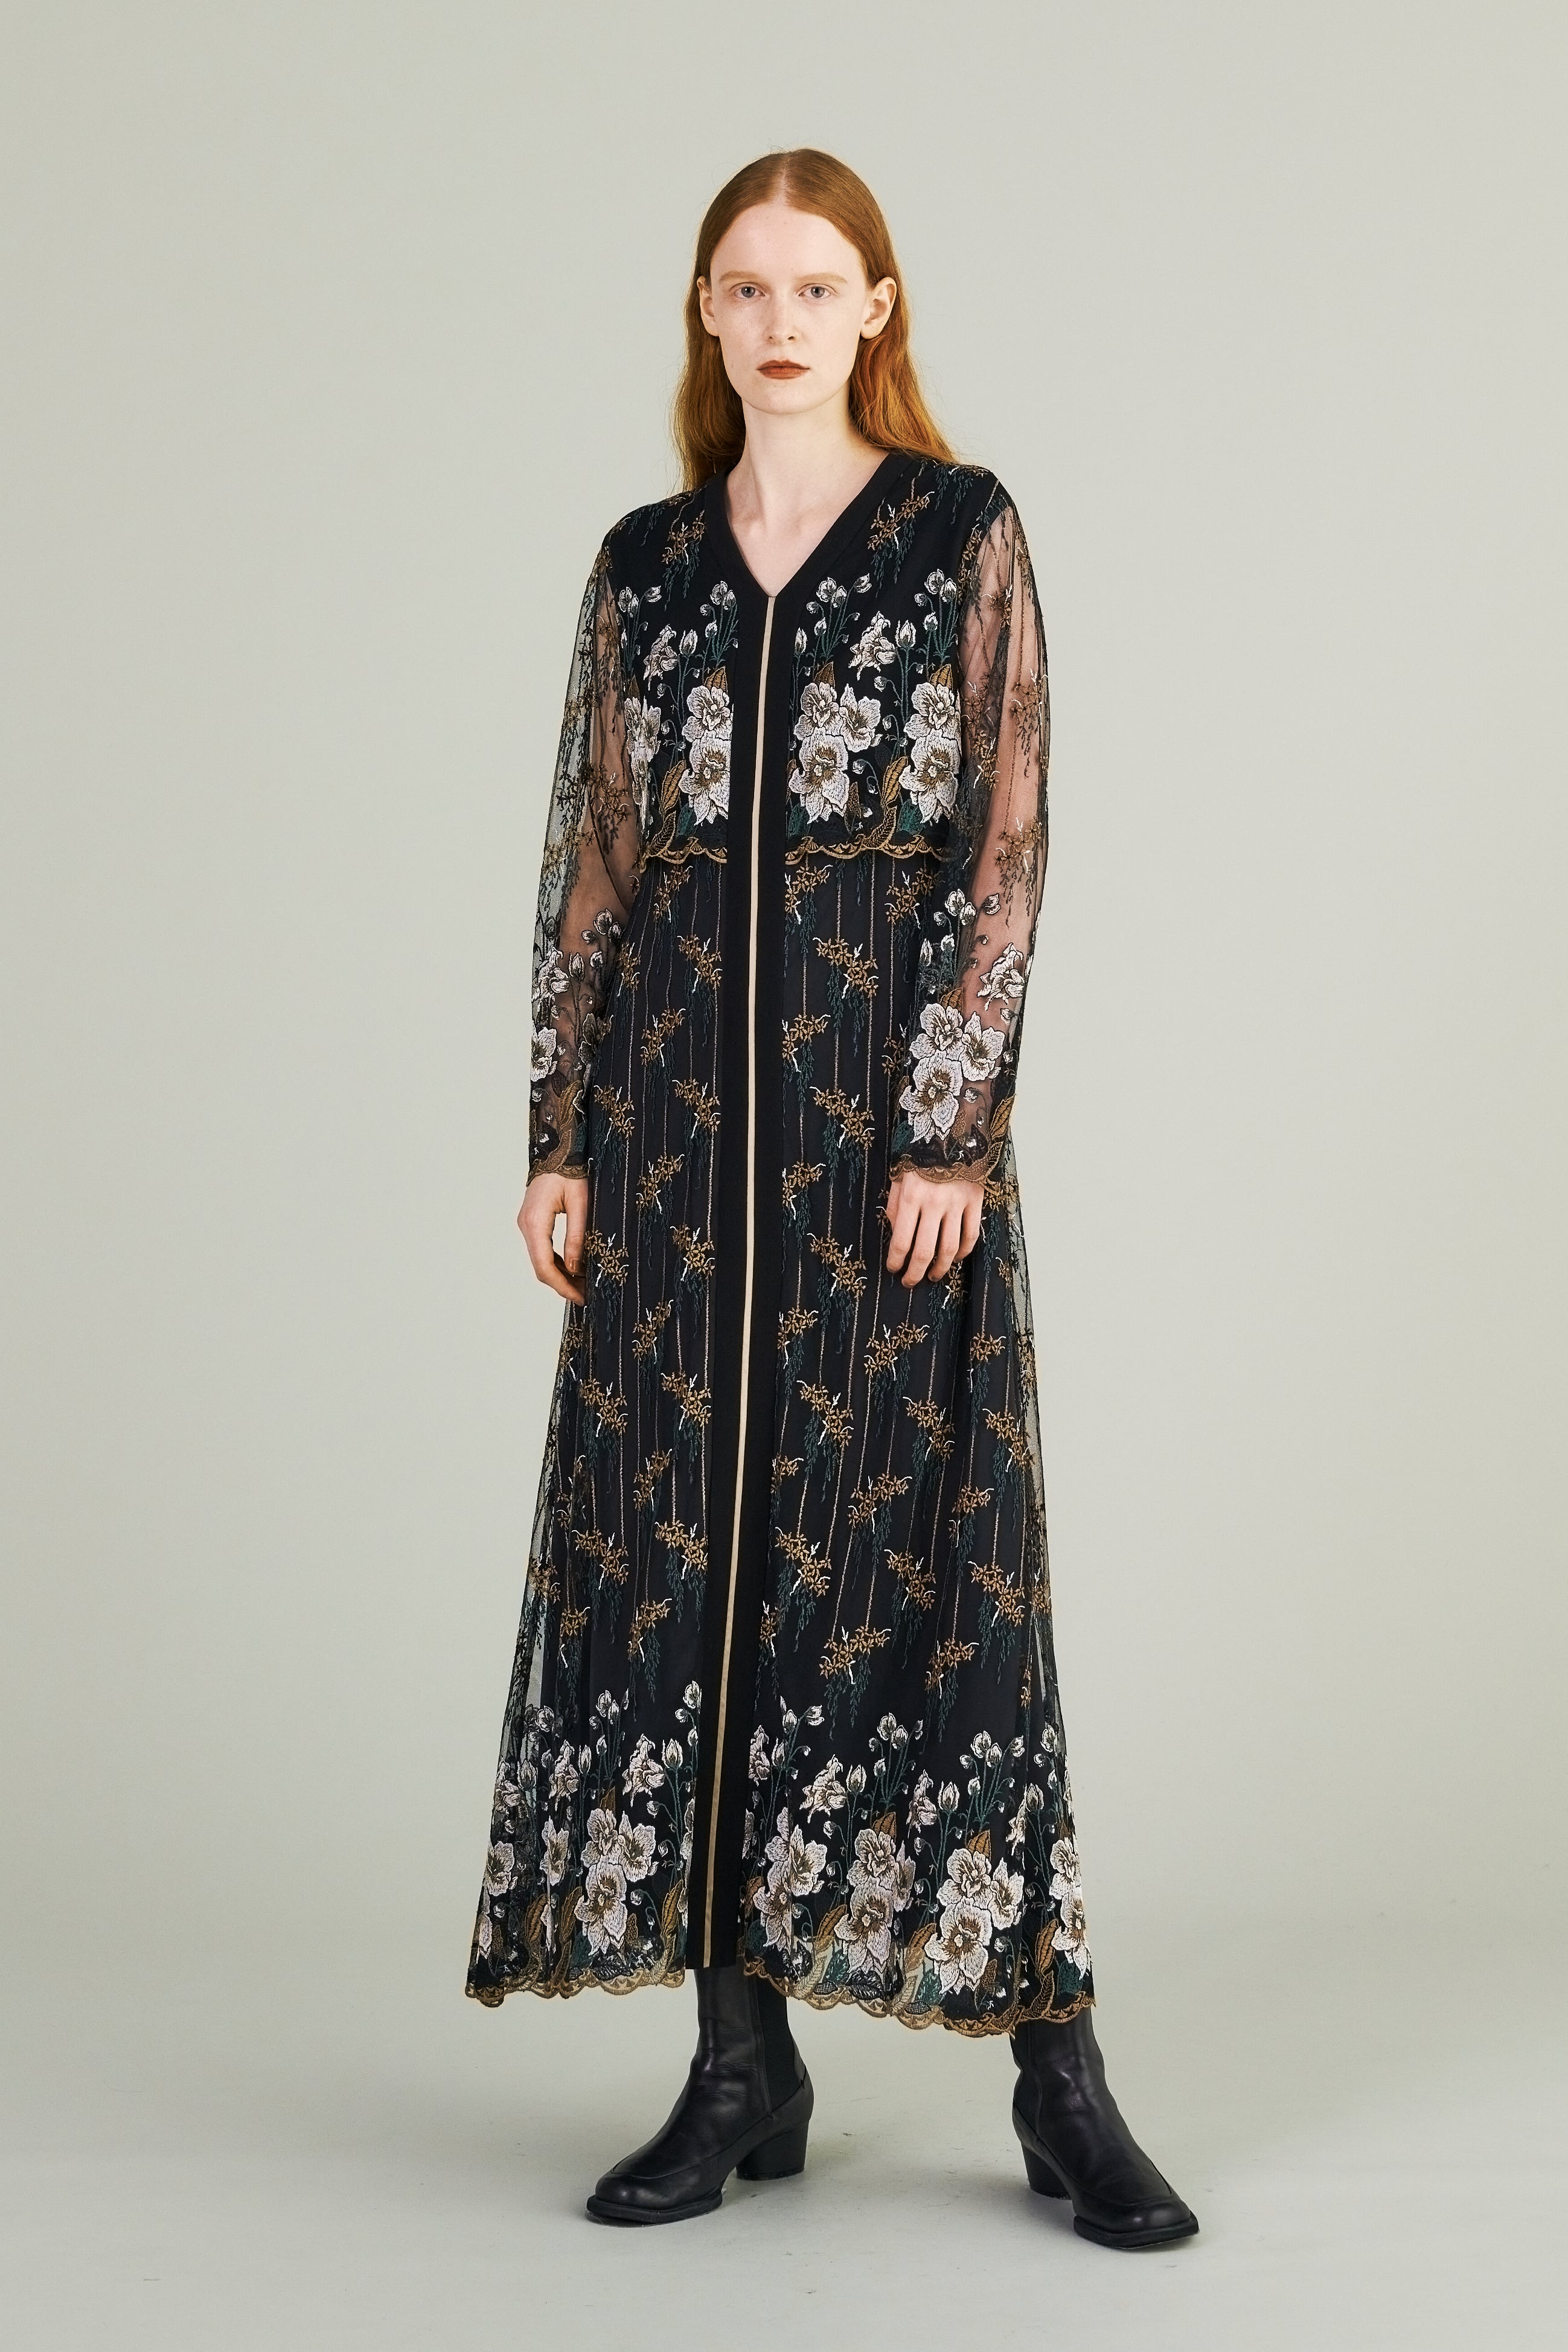 Everlasting embroidery lace dress (Black) – MURRAL